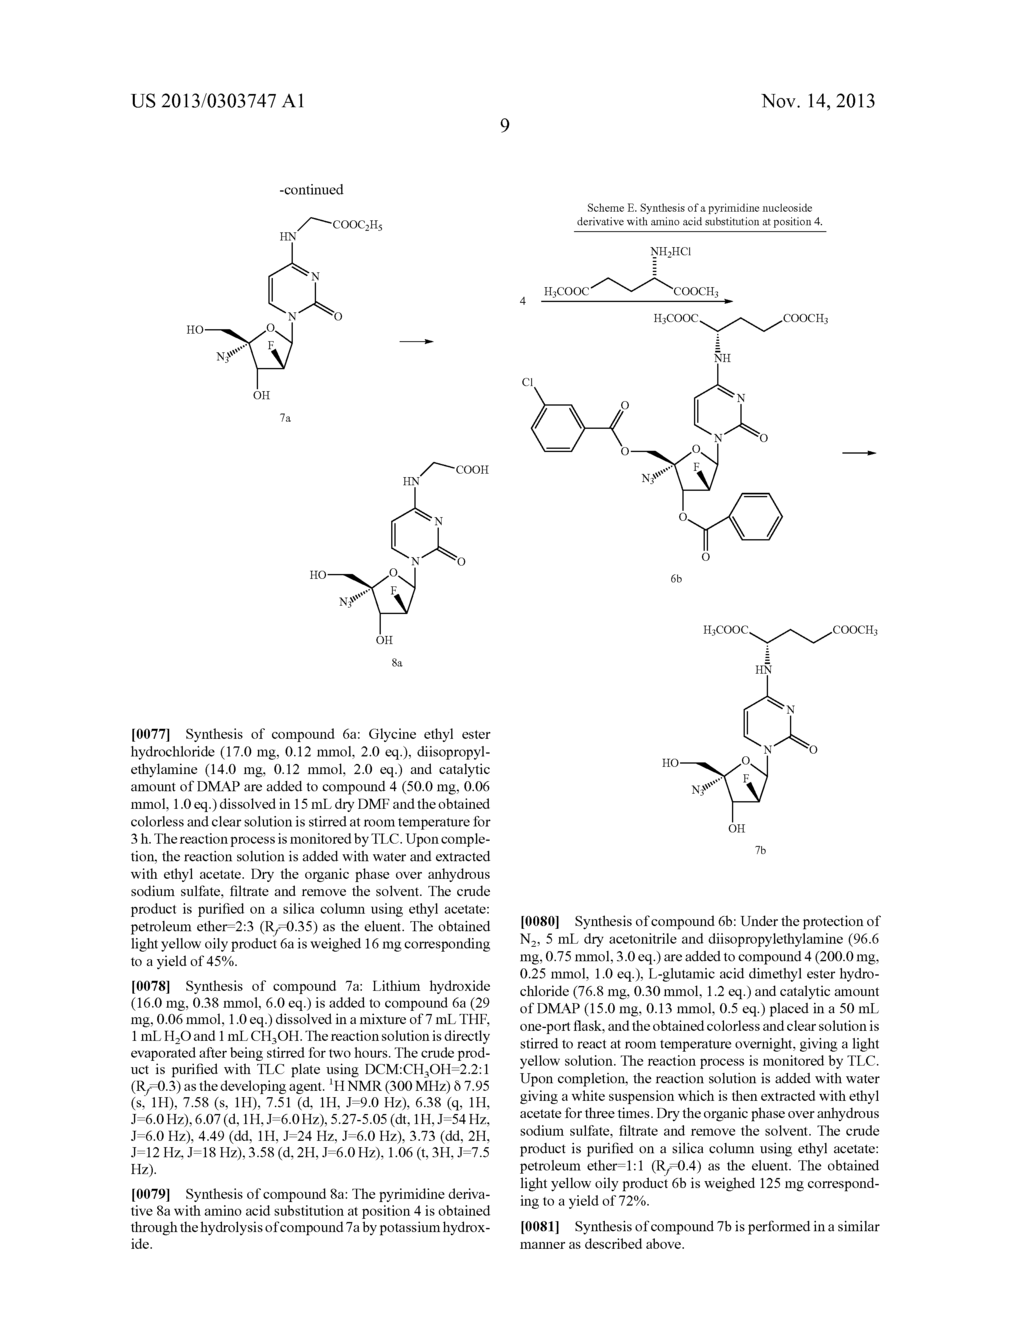 PYRIMIDINE NUCLEOSIDE DERIVATIVES, SYNTHESIS METHODS AND USES THEREOF FOR     PREPARING ANTI-TUMOR AND ANTI-VIRUS MEDICAMENTS - diagram, schematic, and image 10